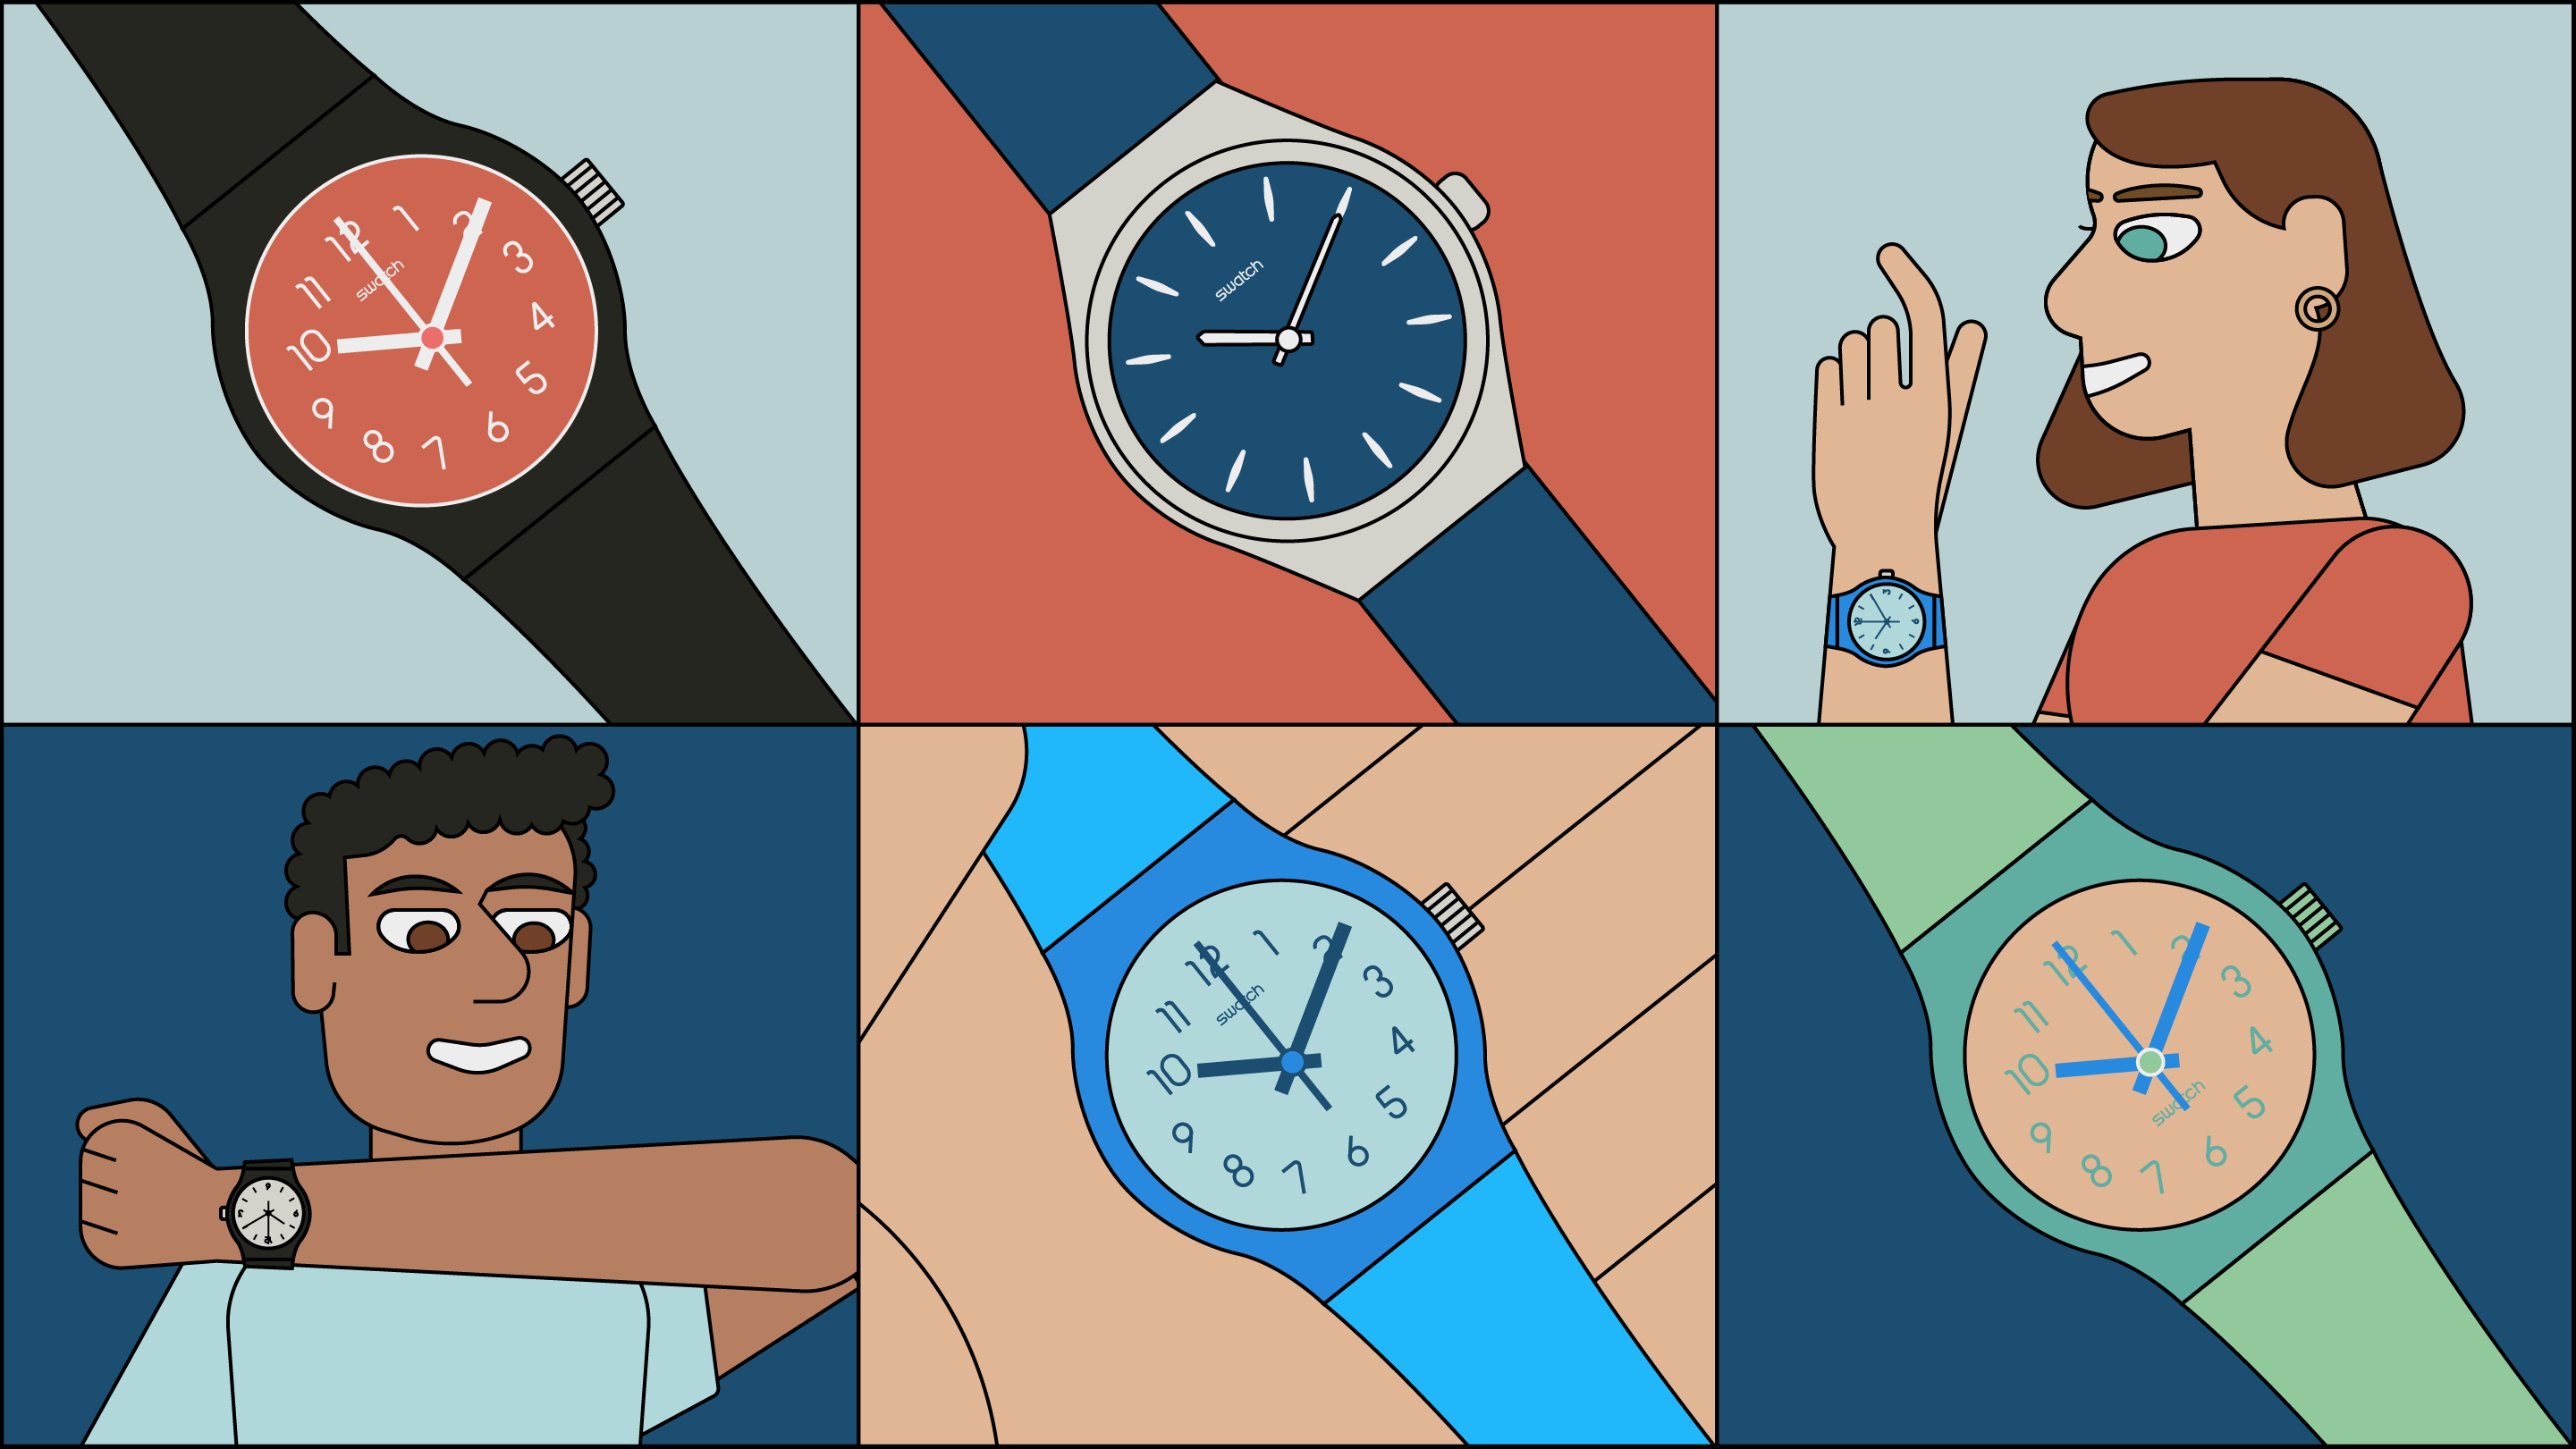 Wrist Watch Illustration Projects :: Photos, videos, logos, illustrations  and branding :: Behance